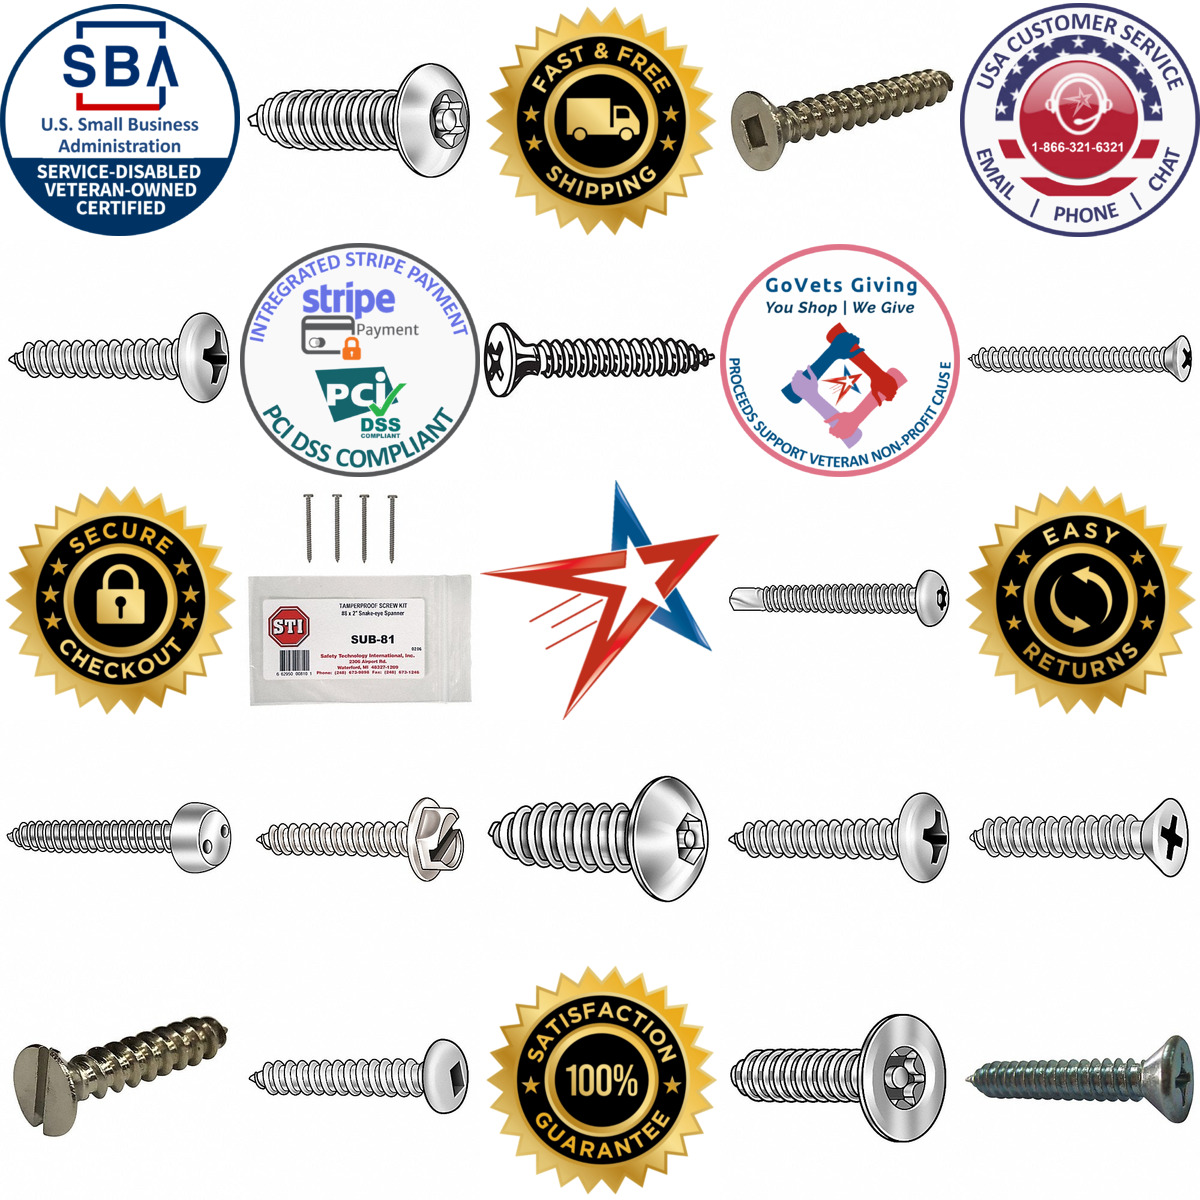 A selection of Sheet Metal Screws products on GoVets